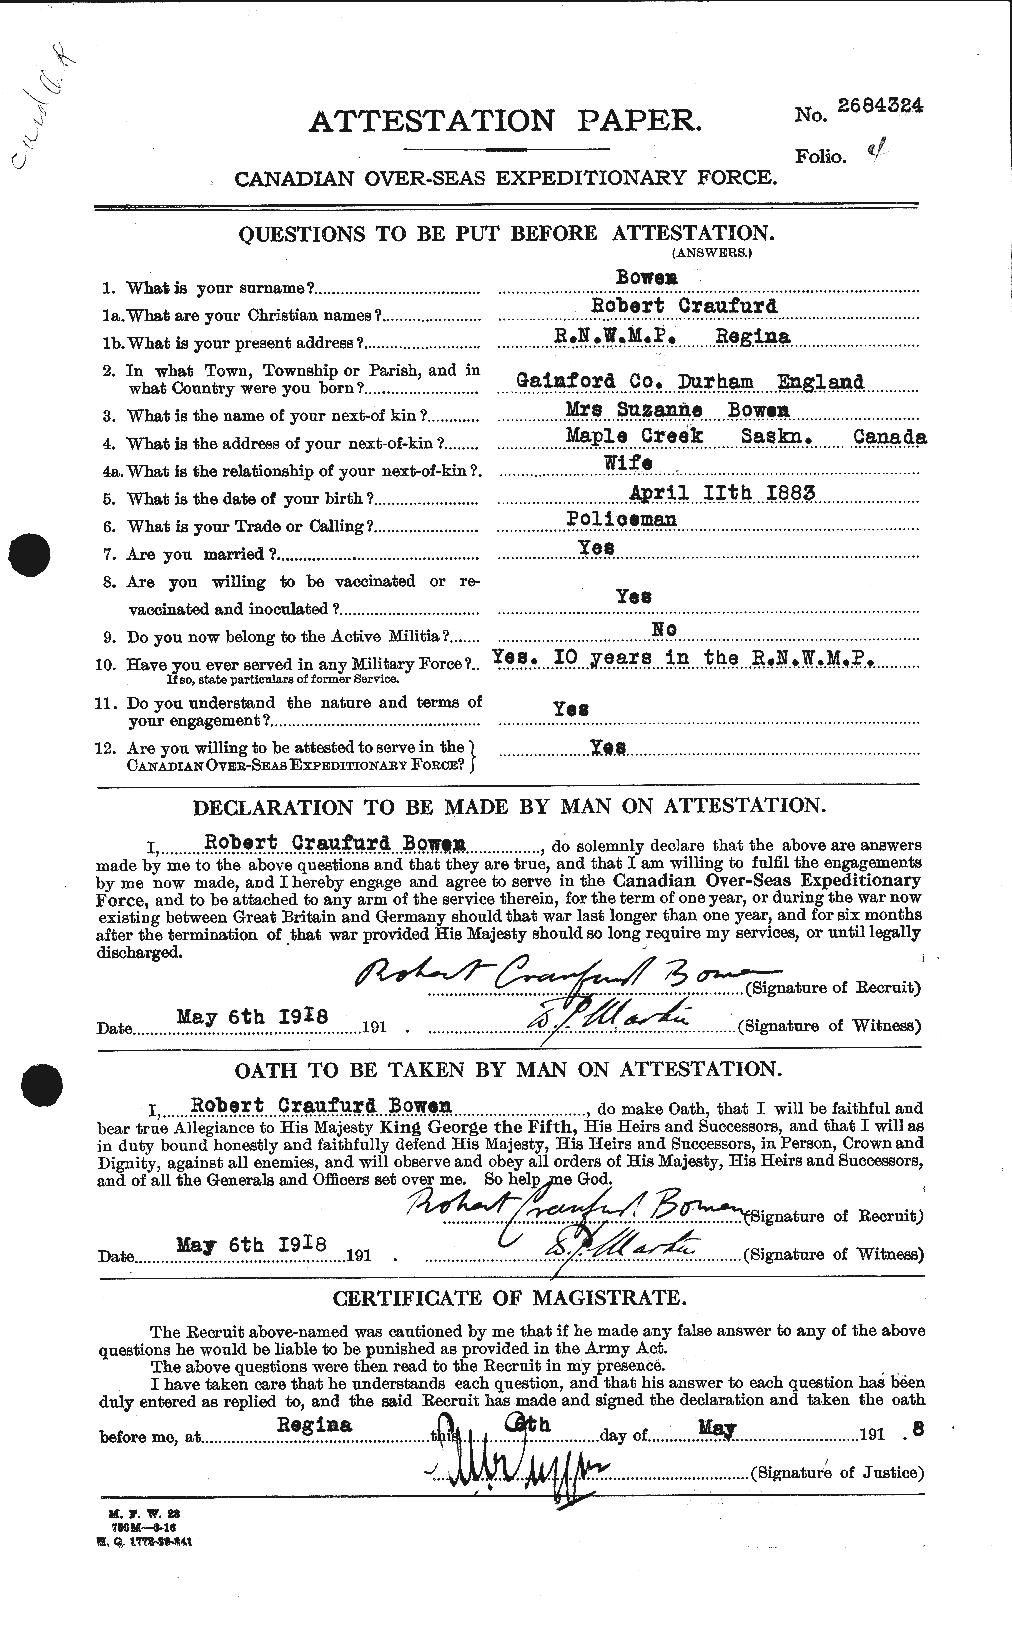 Personnel Records of the First World War - CEF 255464a